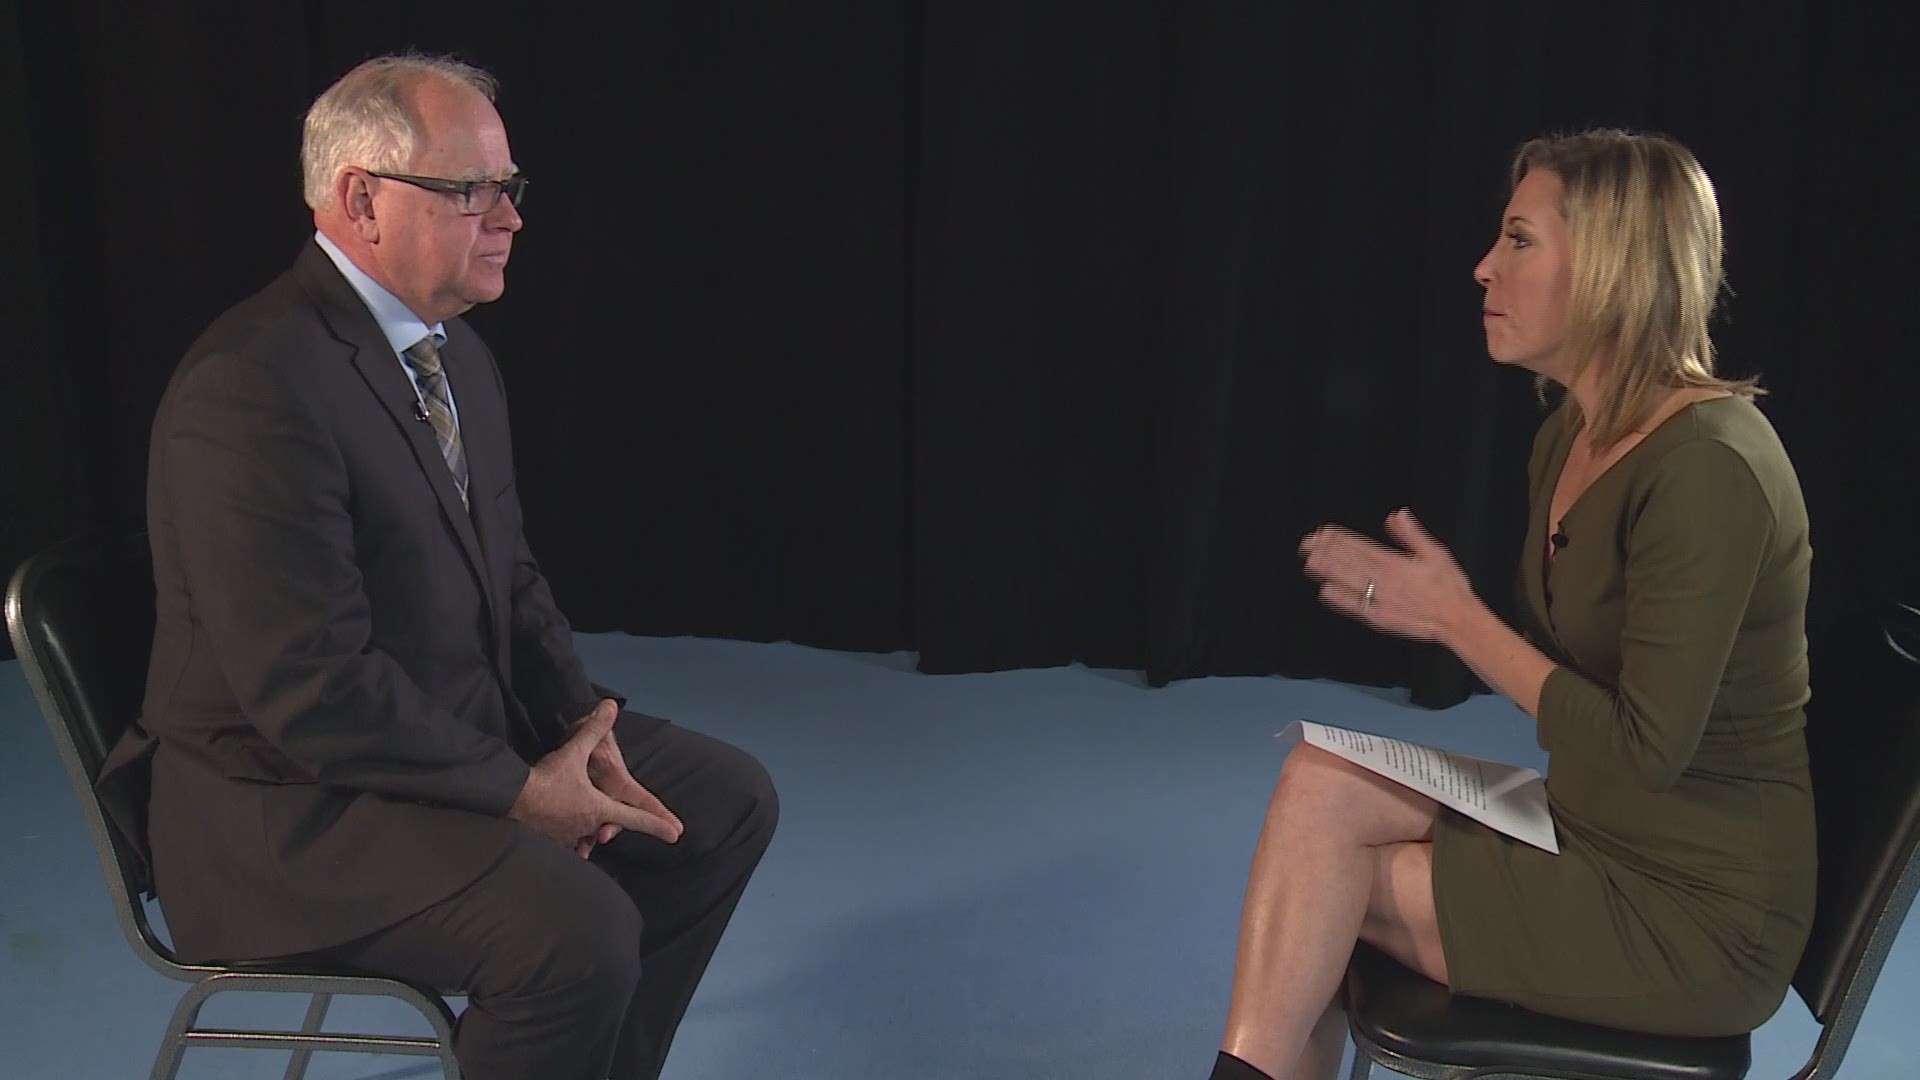 We asked Tim Walz, Democratic candidate for governor in Minnesota, questions YOU wanted answers to in a "speed round" of questions. https://kare11.tv/2Q6M6Lx